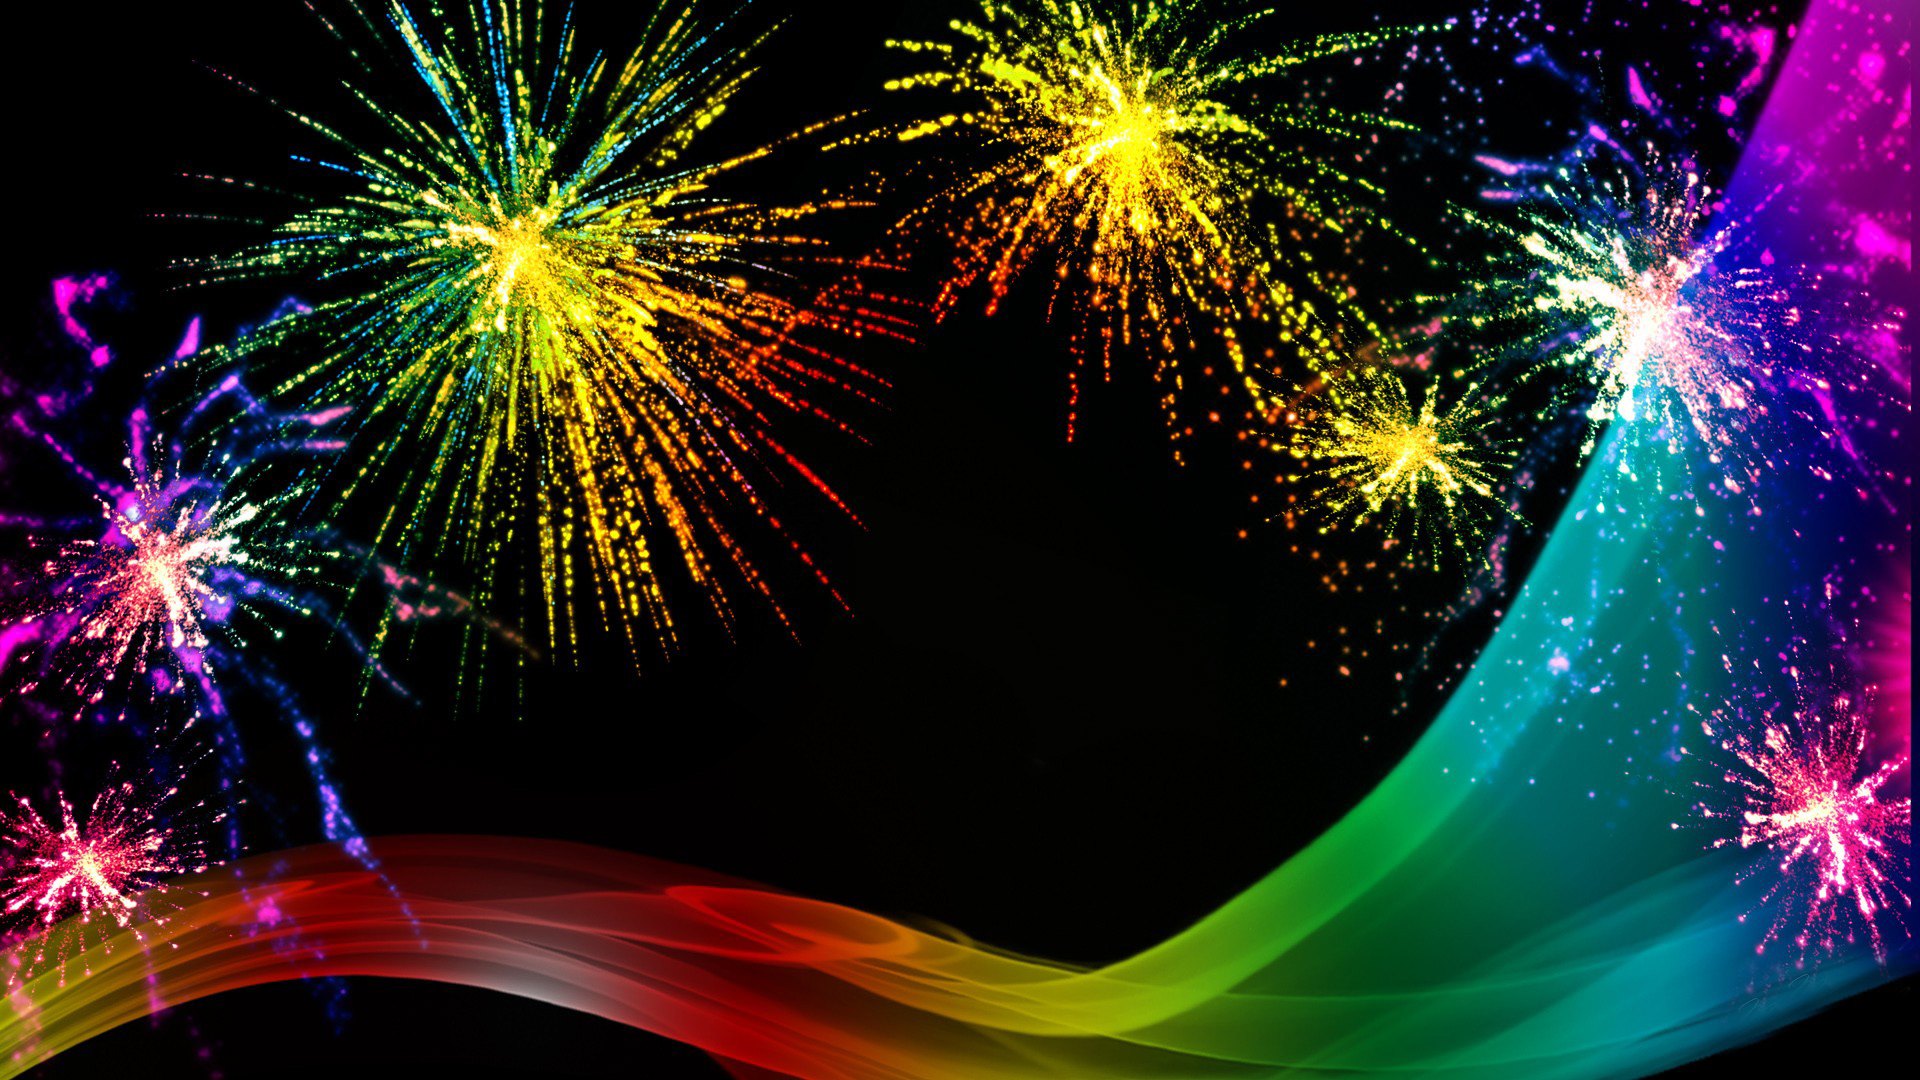 Rainbow Fireworks Celebration Colorful Abstract Image With ...